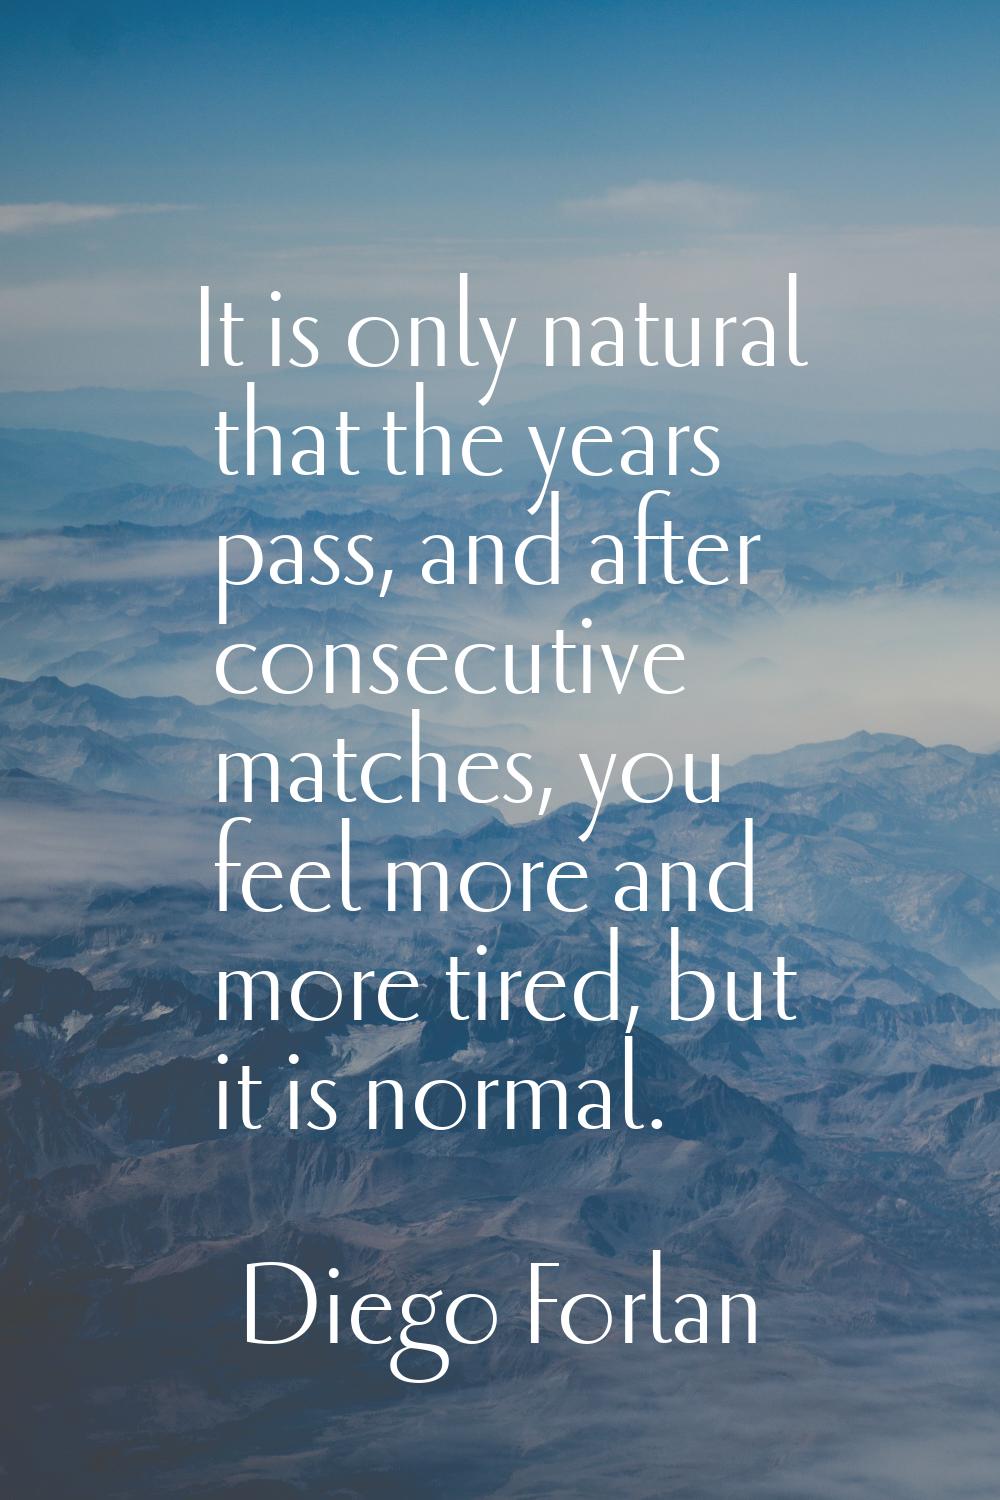 It is only natural that the years pass, and after consecutive matches, you feel more and more tired